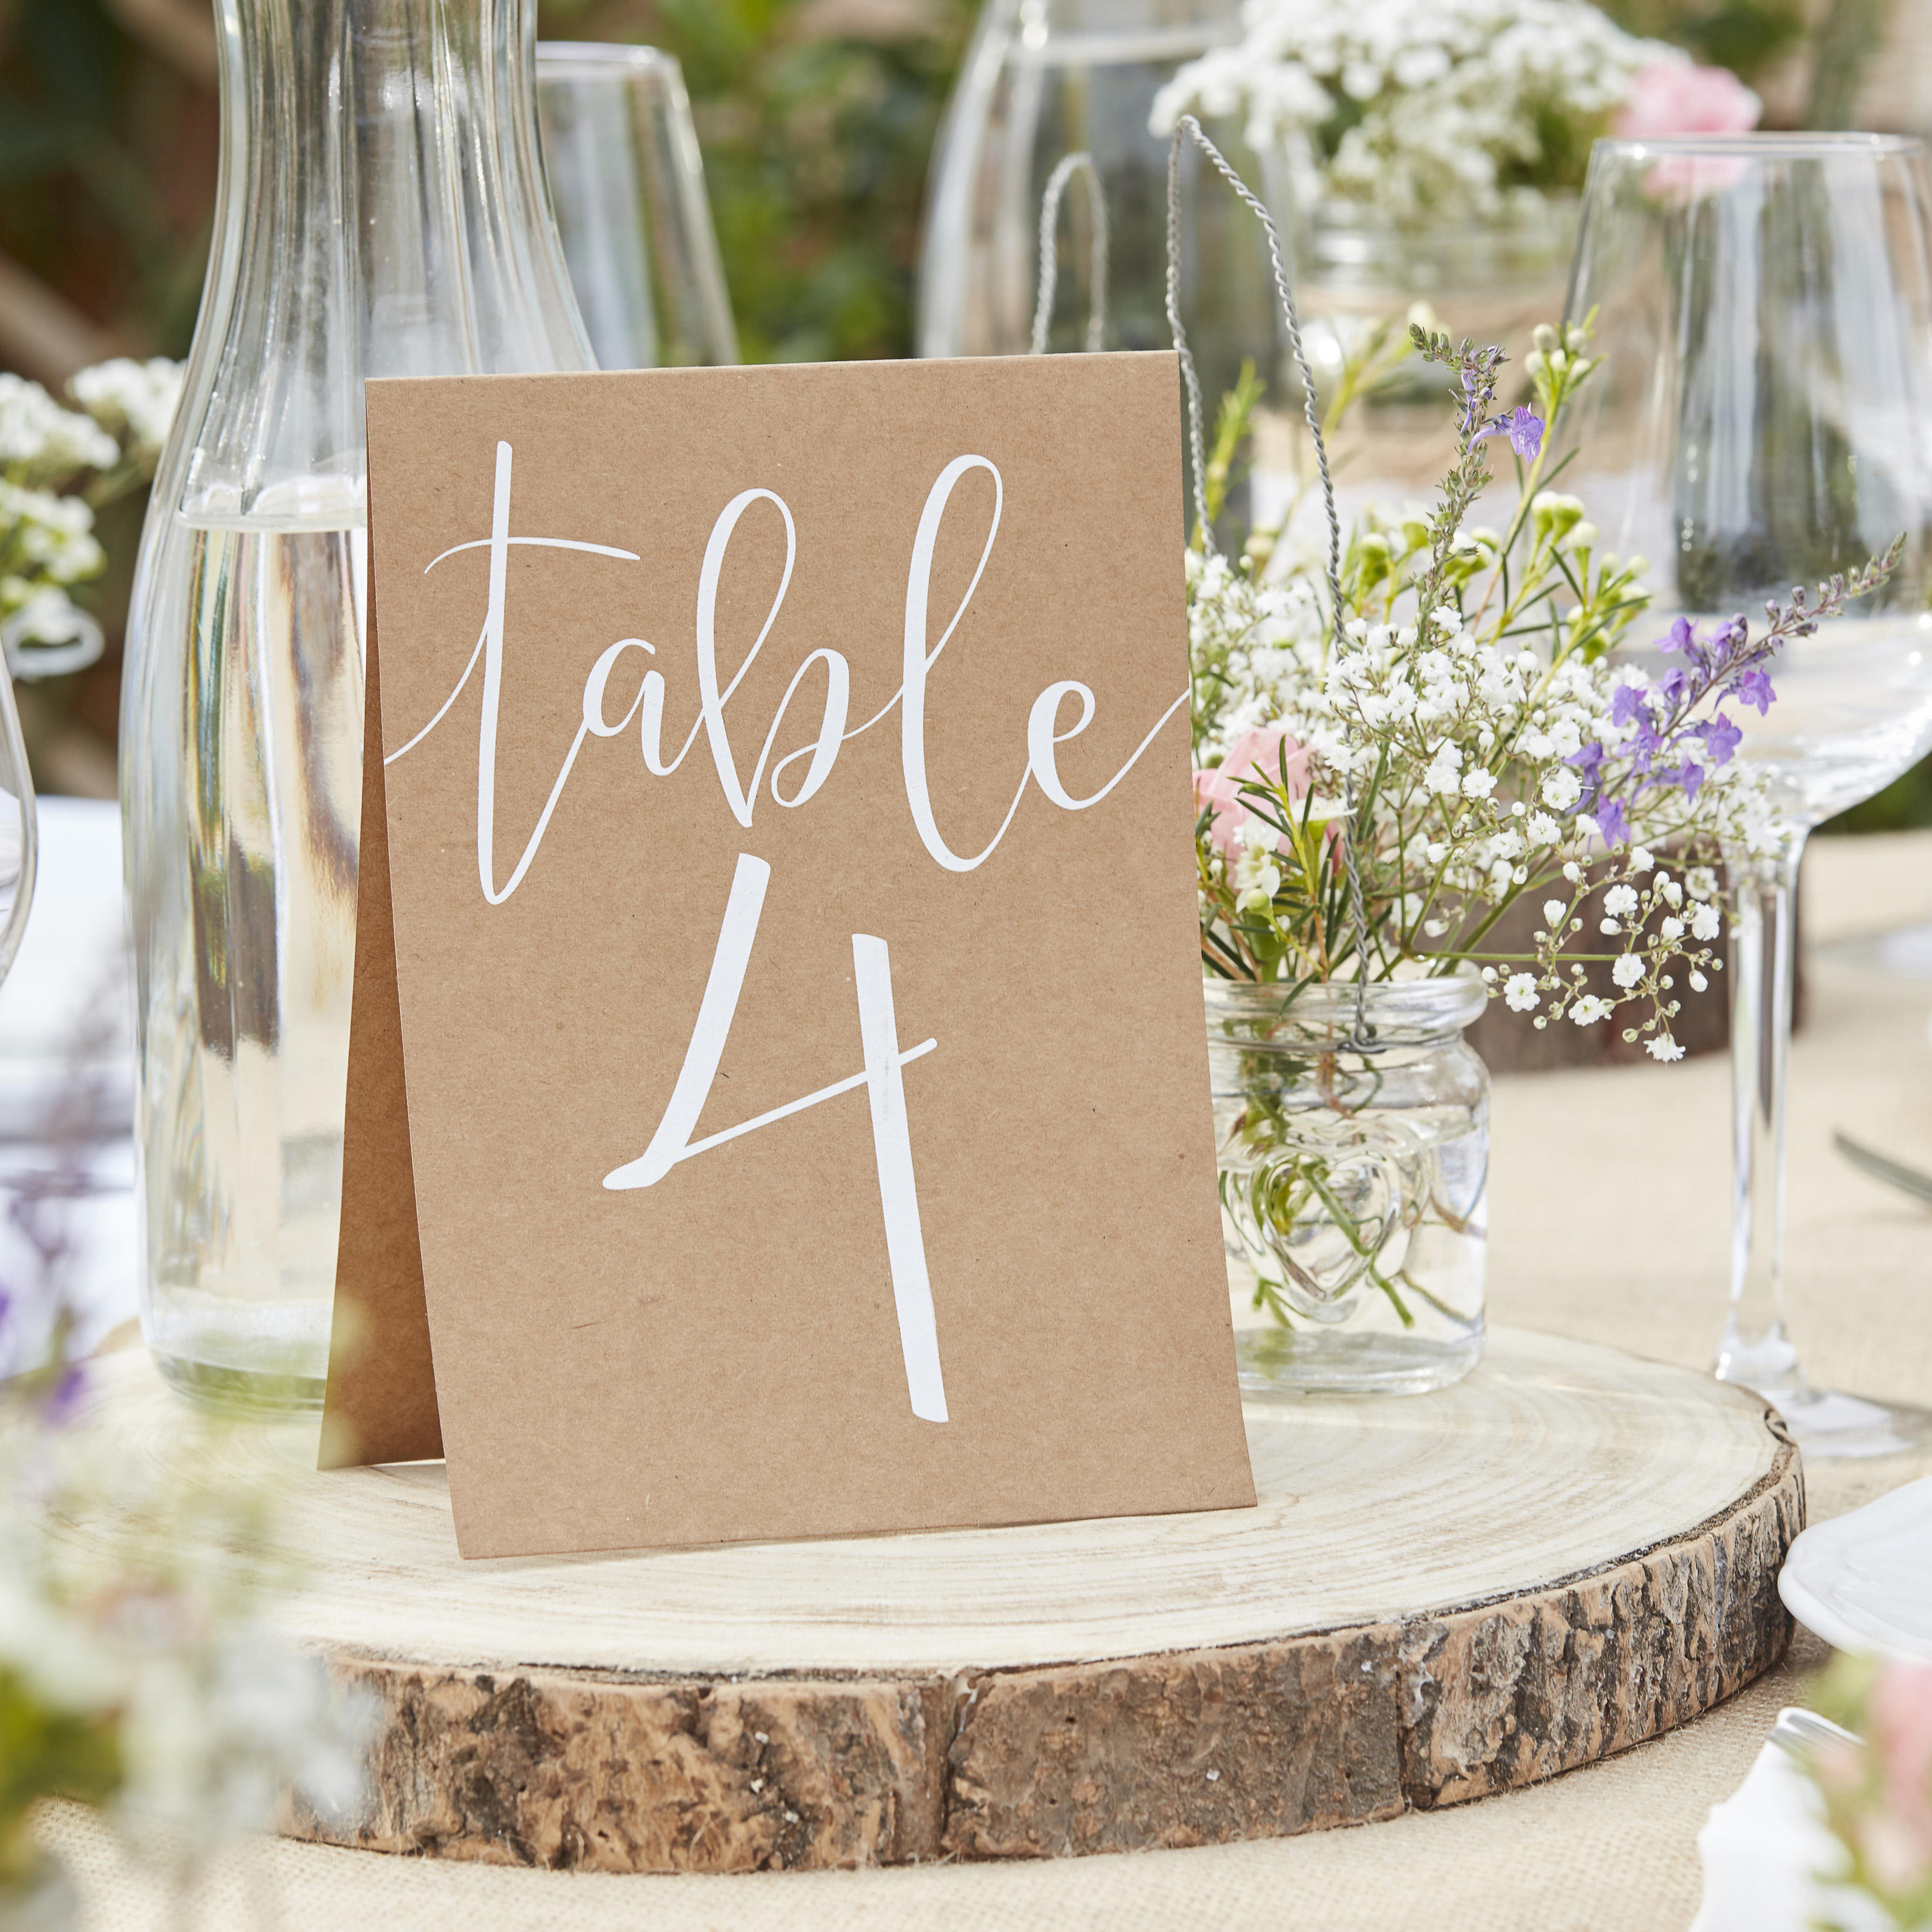 Rustic Wedding Table Numbers 1 12, How Big Are Wedding Table Numbers